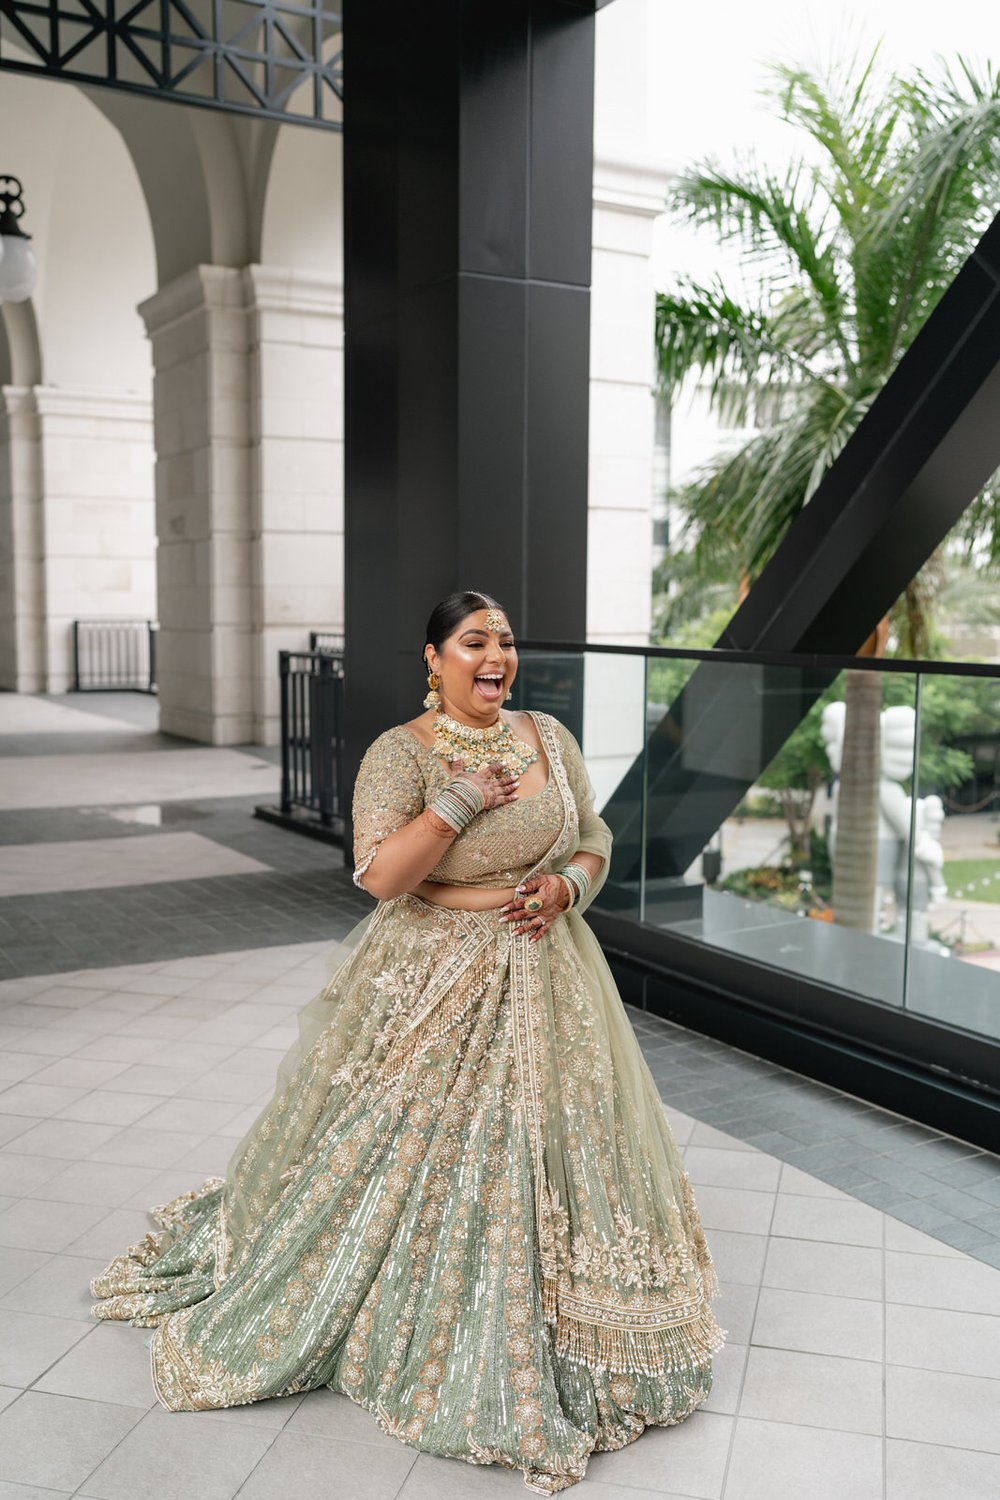 Luxury Indian Wedding in Miami Florida - Indian wedding photographer miami florida - michelle gonzalez photography - loews hotel in coral gables wedding-20.jpg